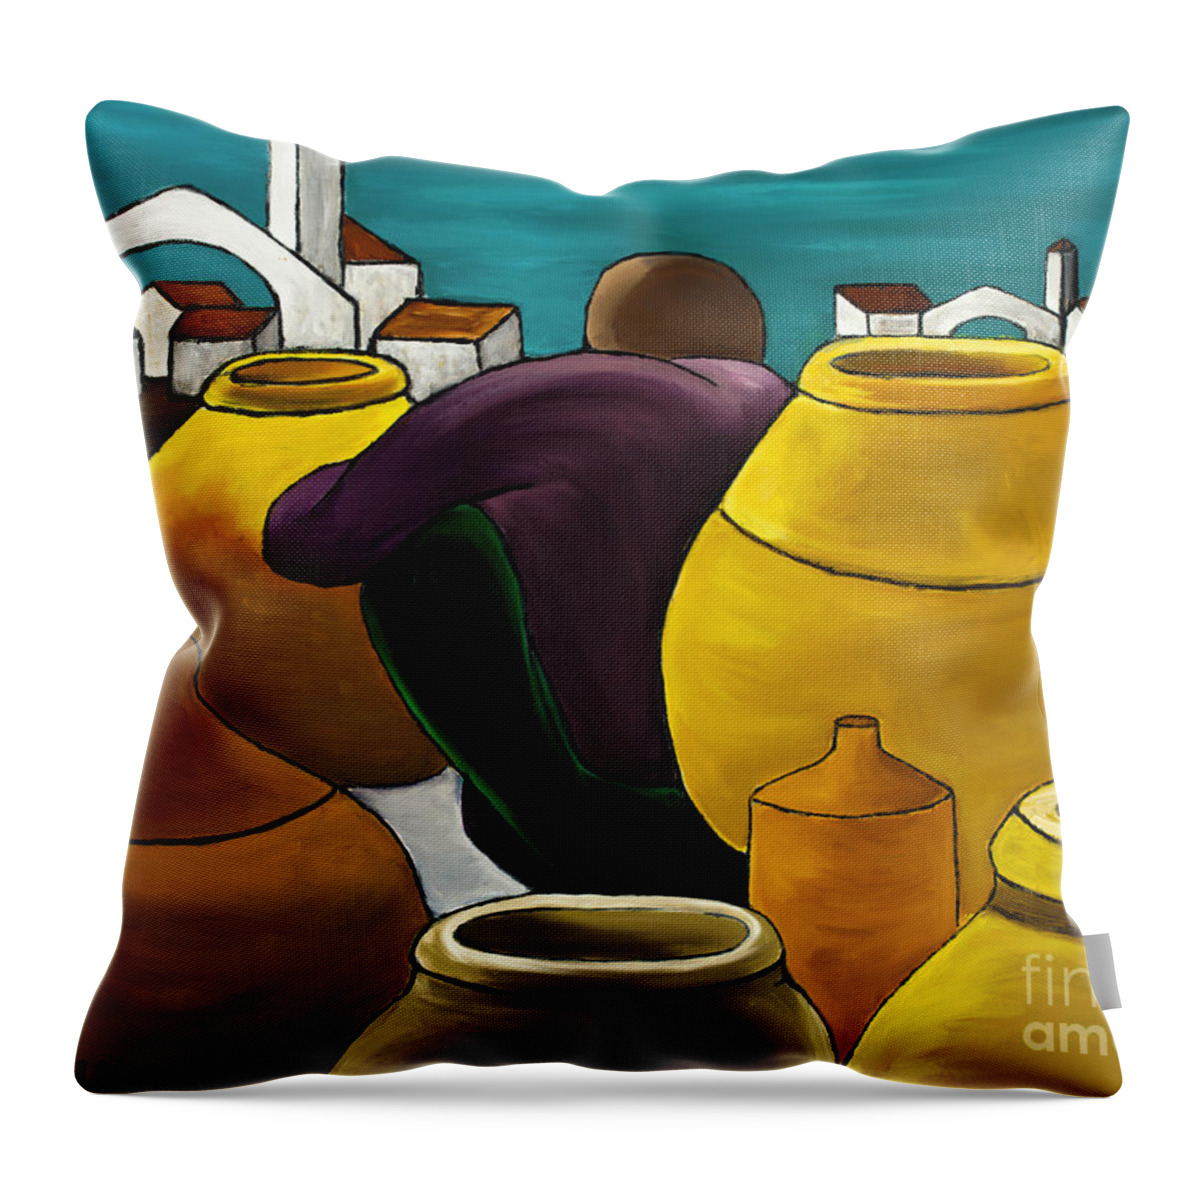 Pots Throw Pillow featuring the painting Man Selling Pots by William Cain